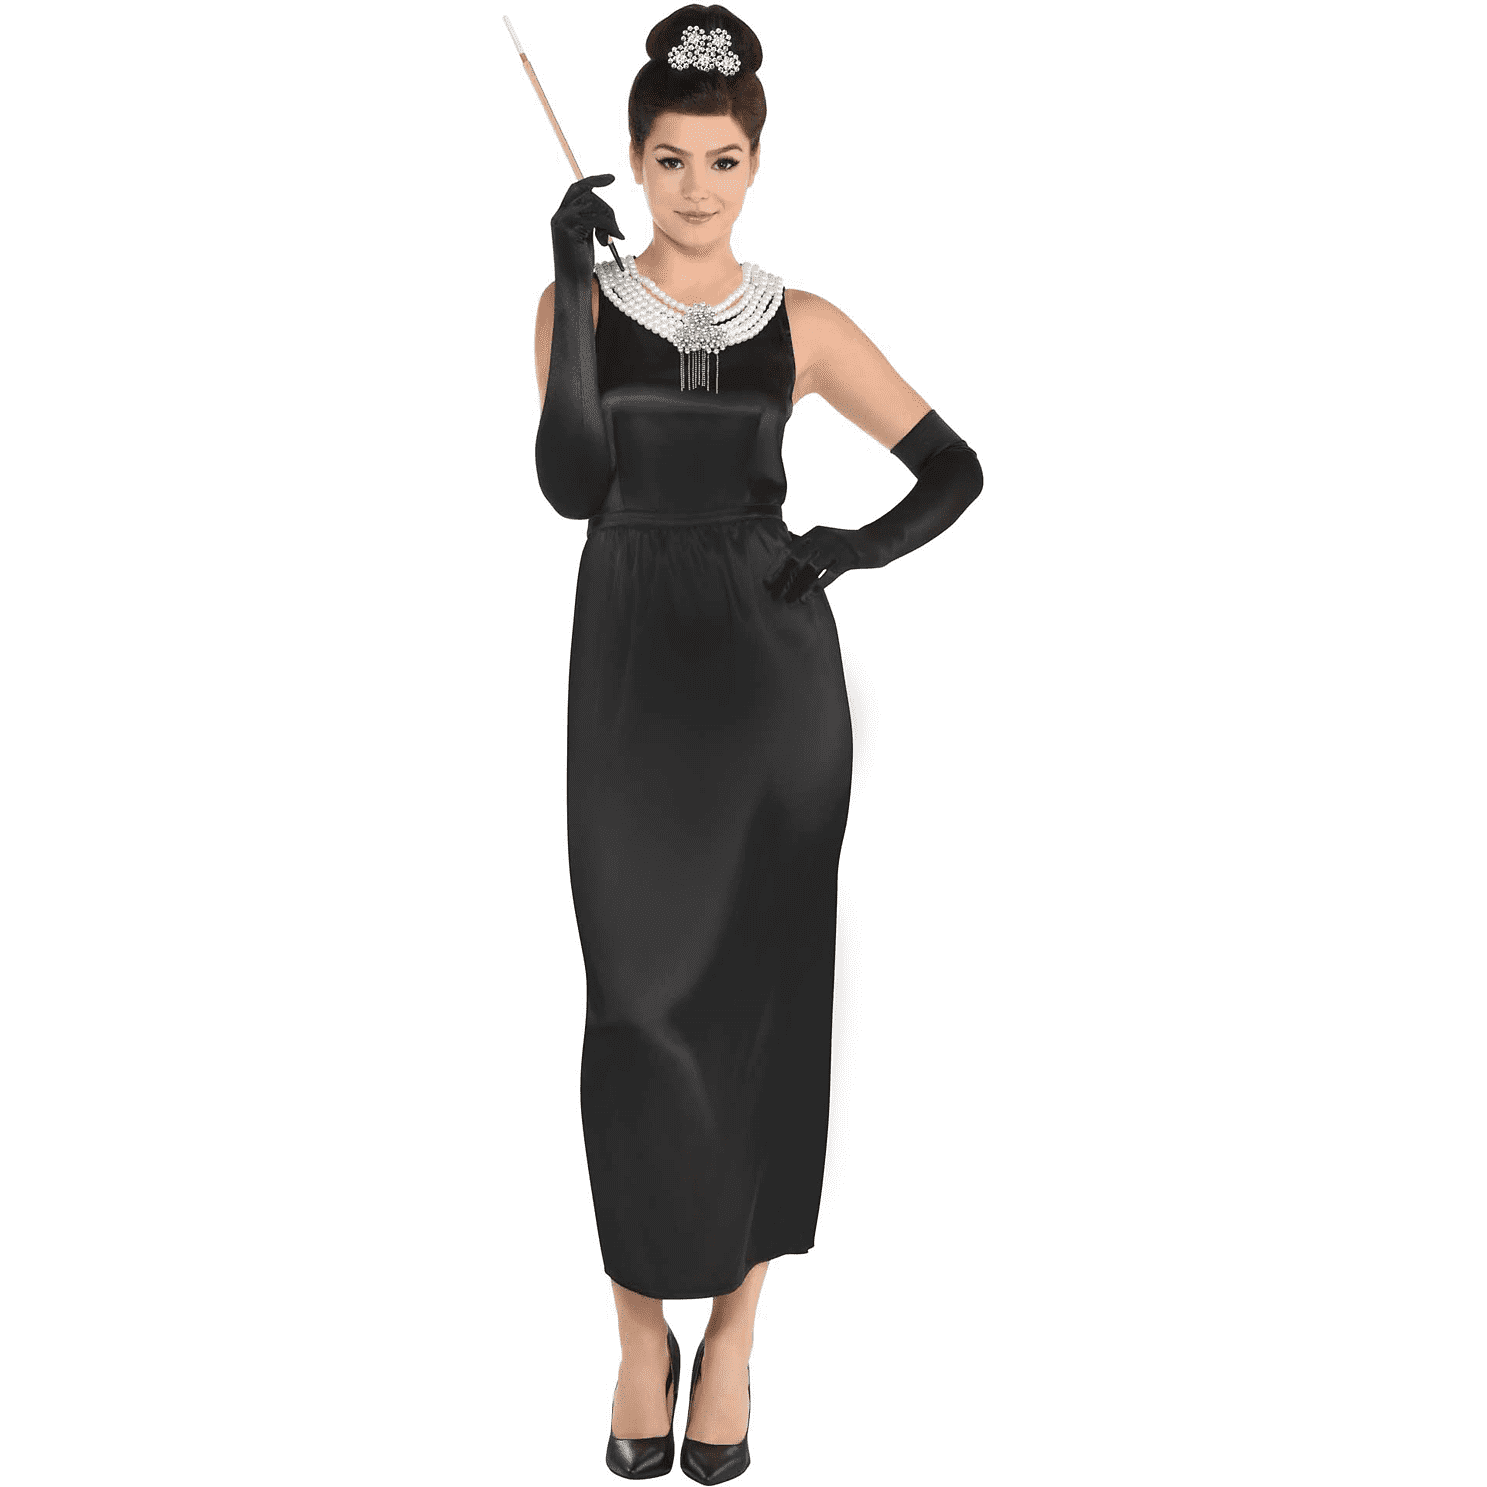 Ultimate Party Super Stores COSTUMES Womens Breakfast At Tiffany's Holly Golightly Adult Costume